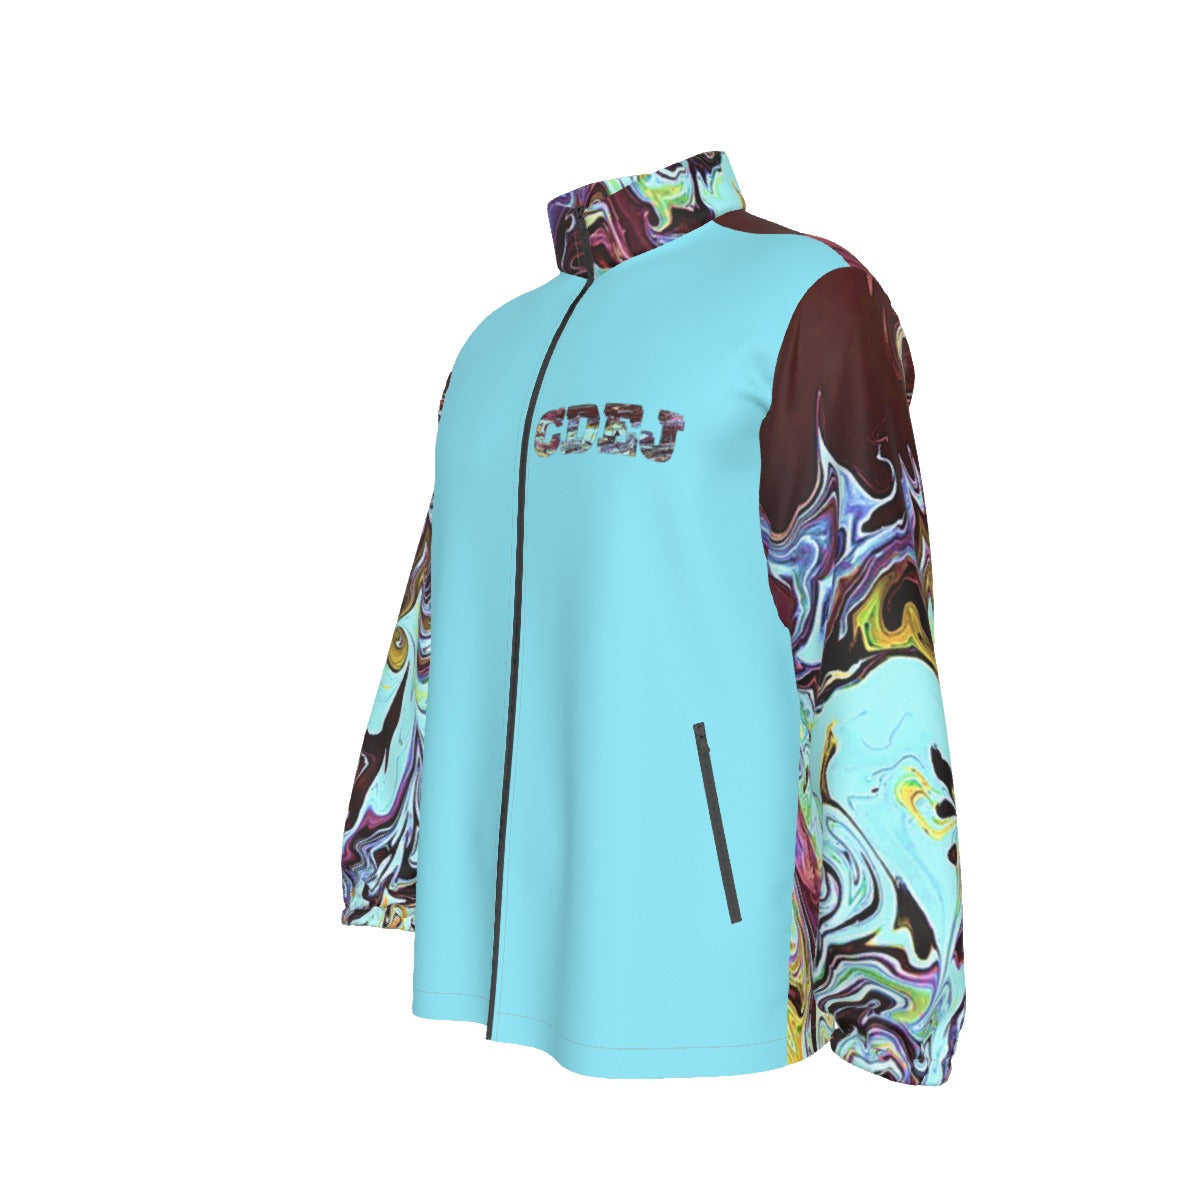 CDEJ Turquoise Marble Collar Zip-up Windproof Jacket